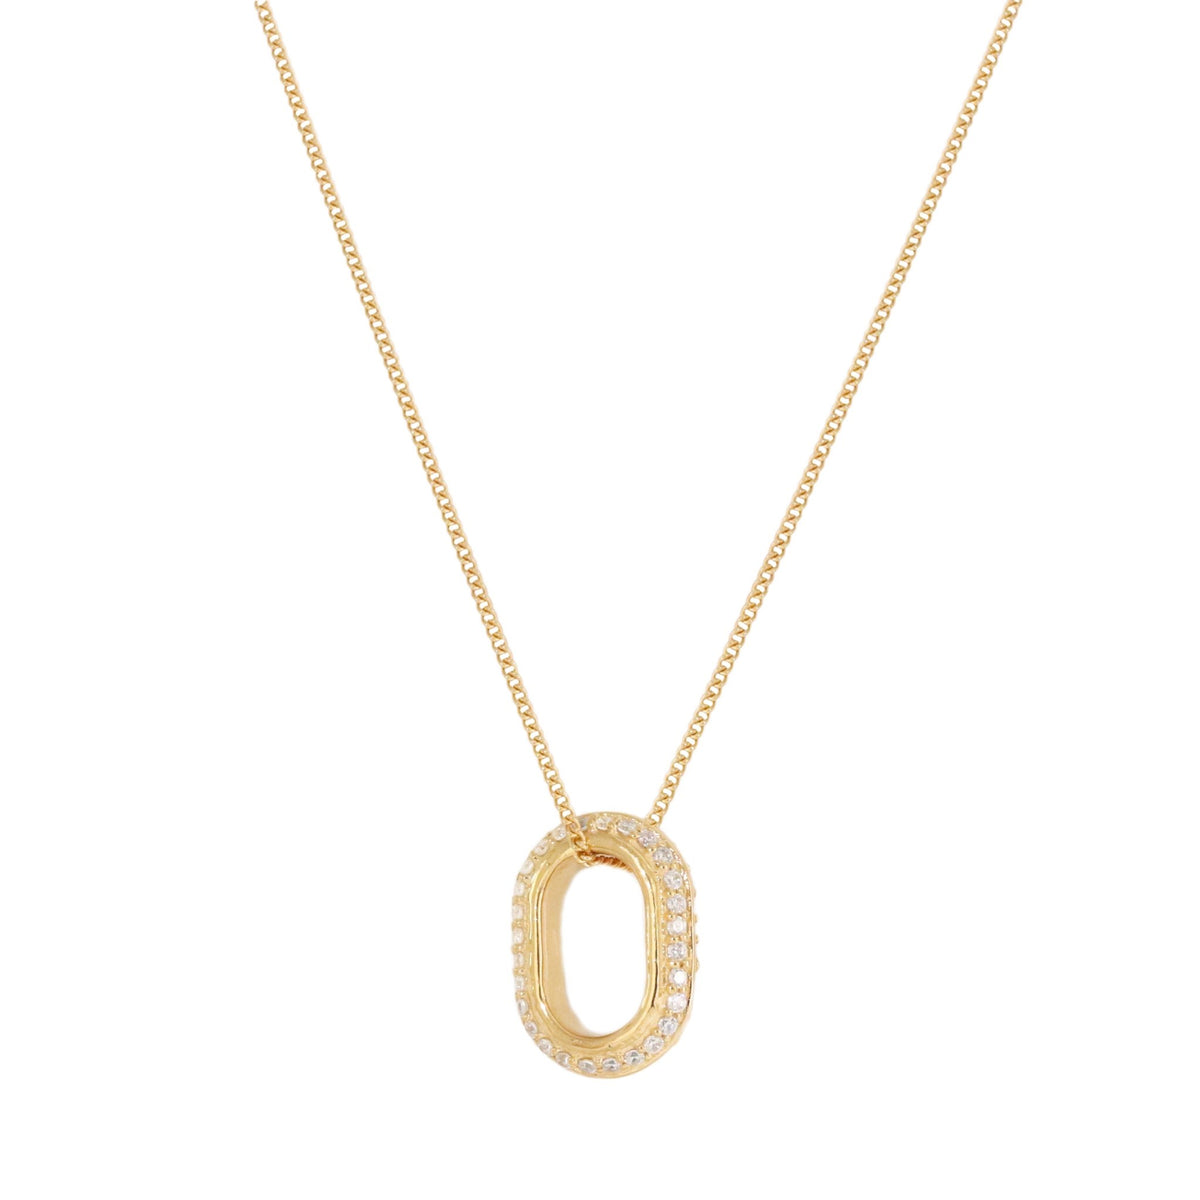 LOVE ETERNITY OVAL PENDANT NECKLACE - CUBIC ZIRCONIA &amp; GOLD - SO PRETTY CARA COTTER